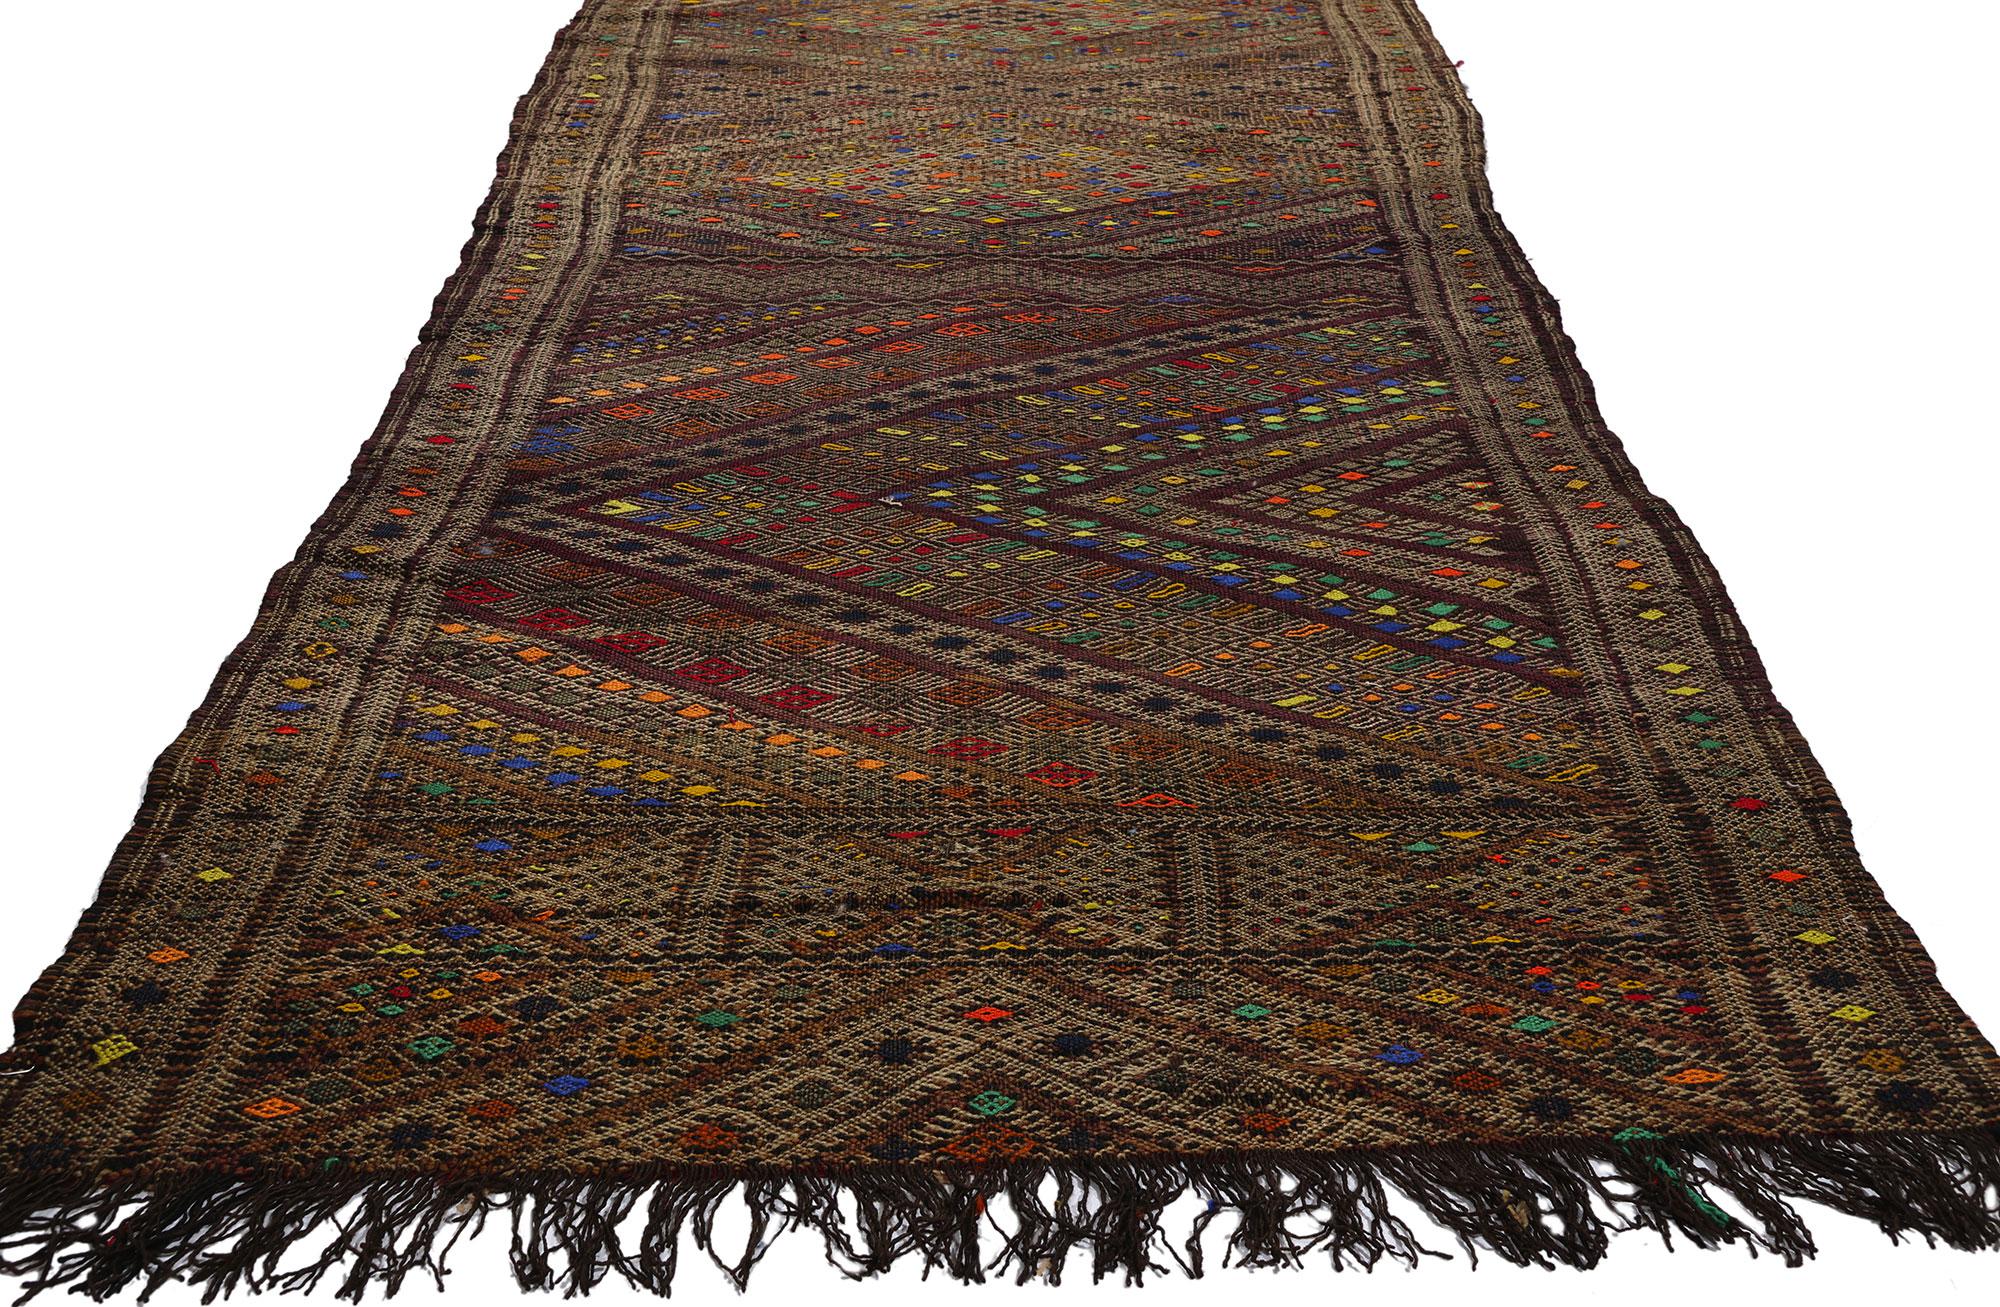 21845 Vintage Zemmour Moroccan Rug, 03'01 x 16'05. Presenting an enchanting Moroccan kilim rug runner, exquisitely handwoven by the skilled artisans of the Zemmour Tribe nestled in the picturesque Middle Atlas Mountains of Morocco. Infused with the